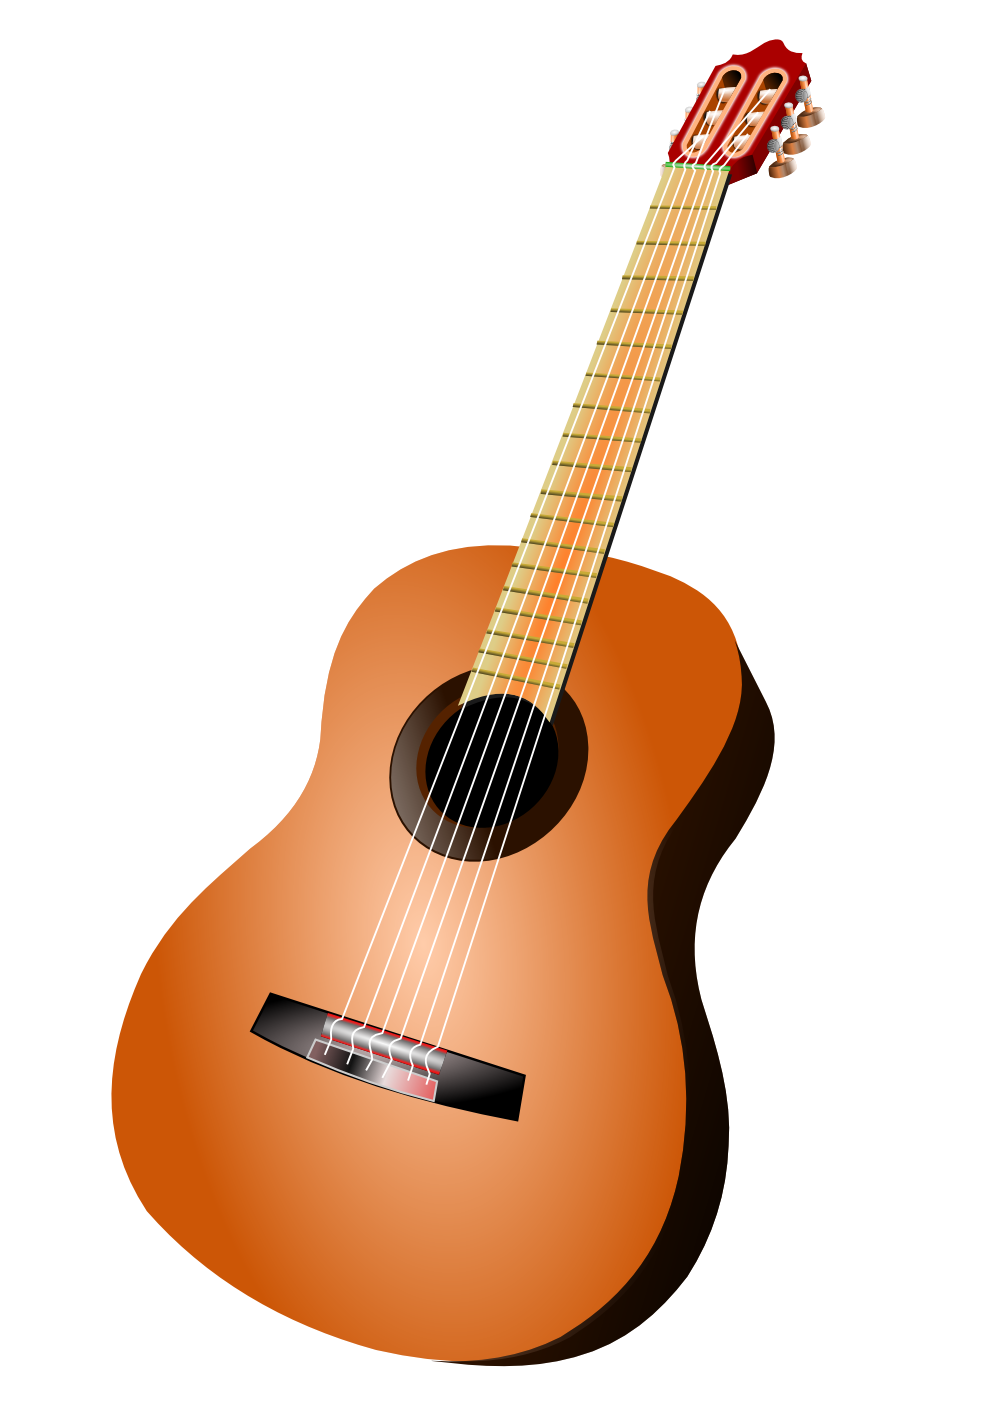 Guitar Acoustic Free HD Image Clipart